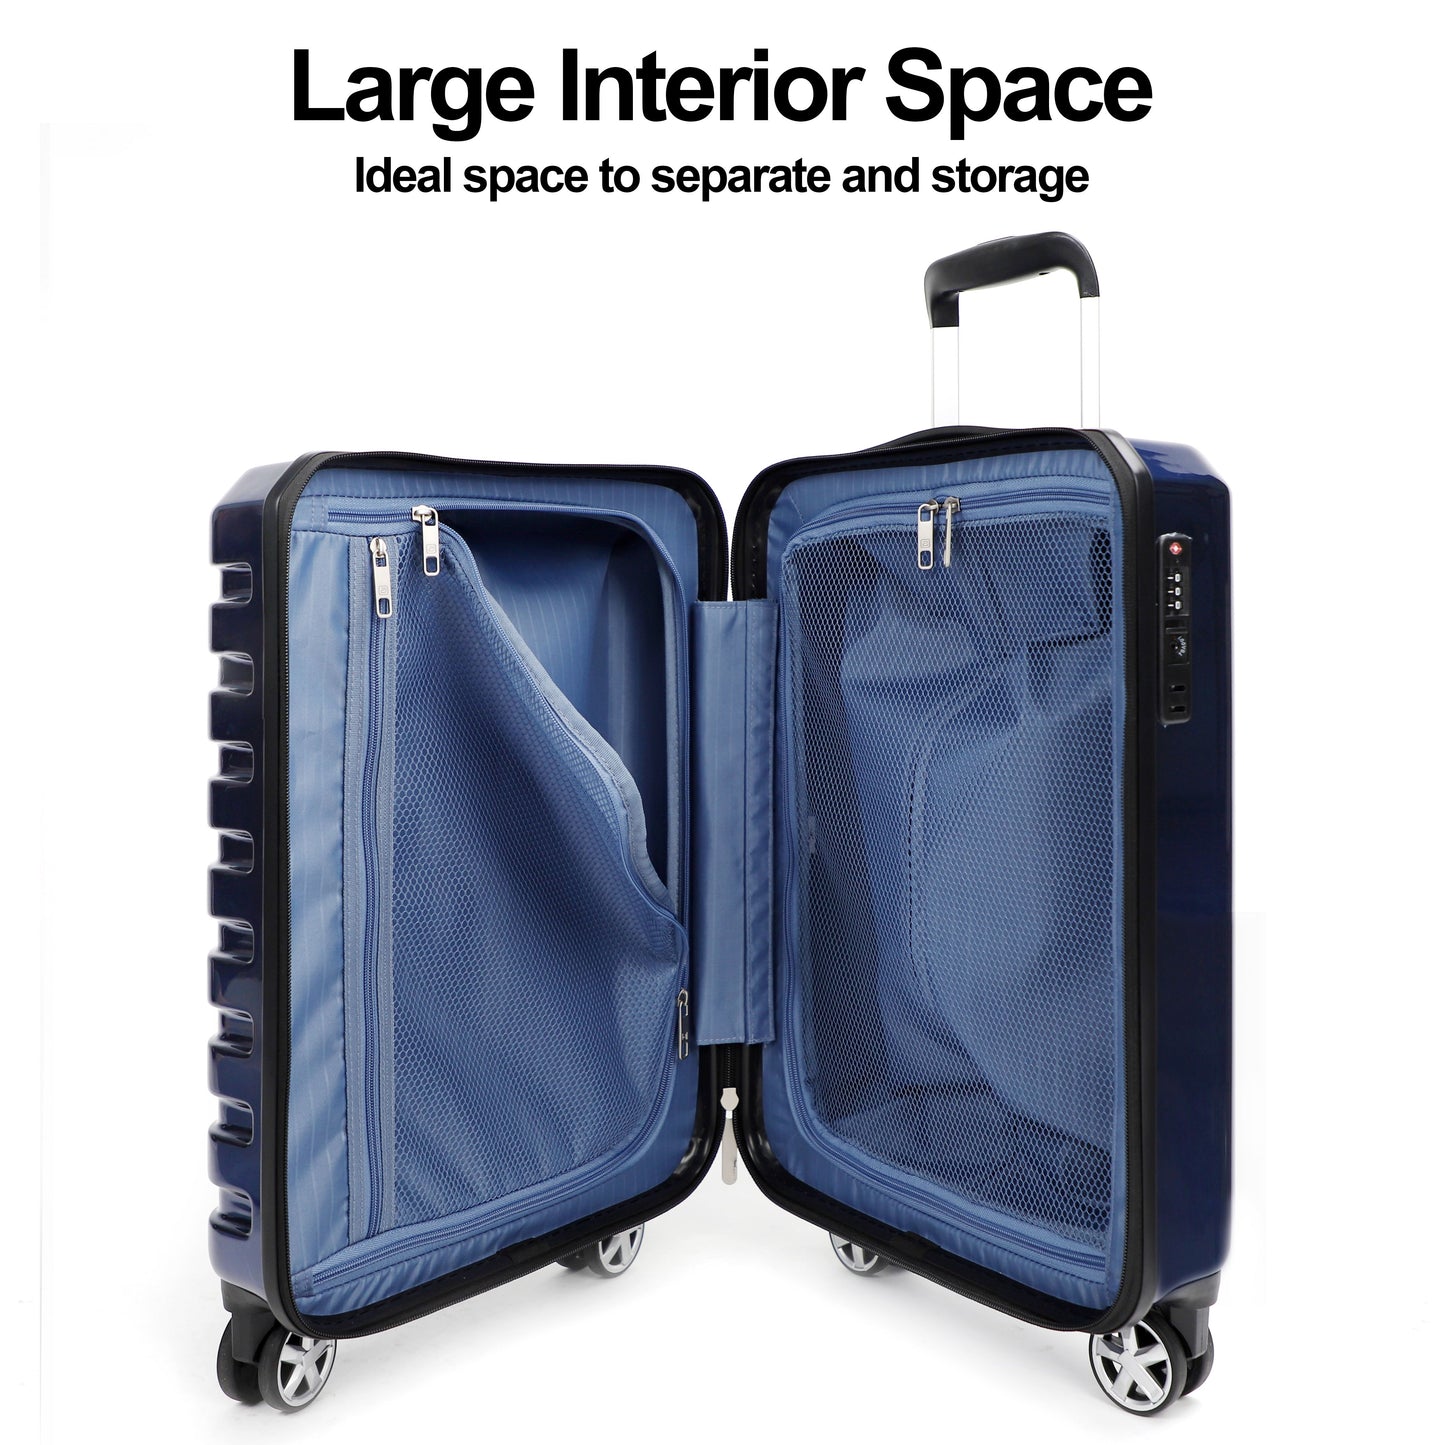 Airline_Carry_On_Luggage_Blue_expanded_viewT1978155005